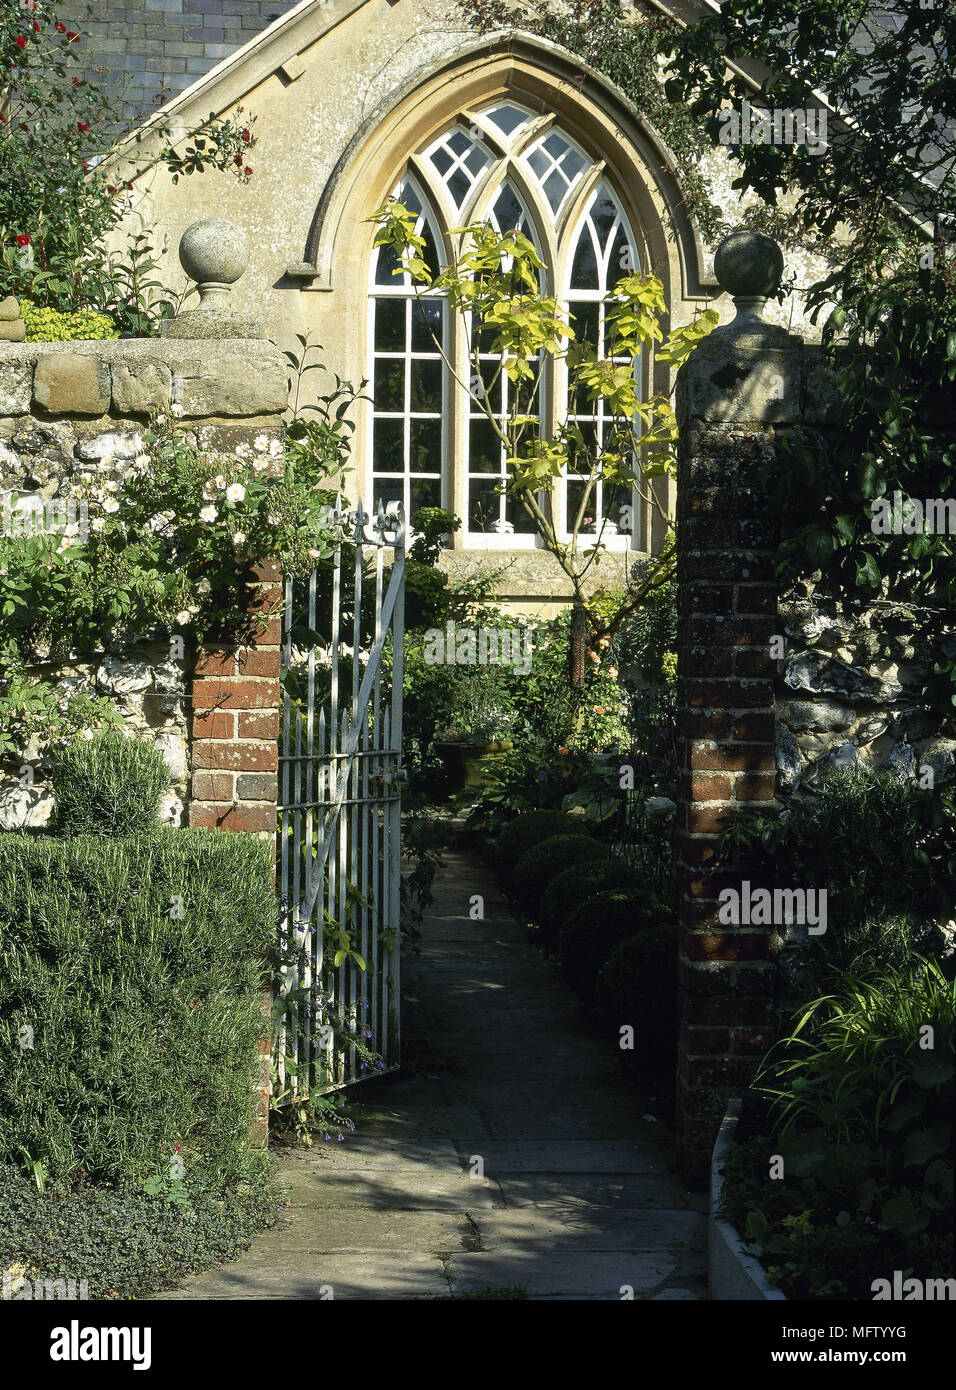 Wrought iron gate open leading to country style house with arched window Stock Photo